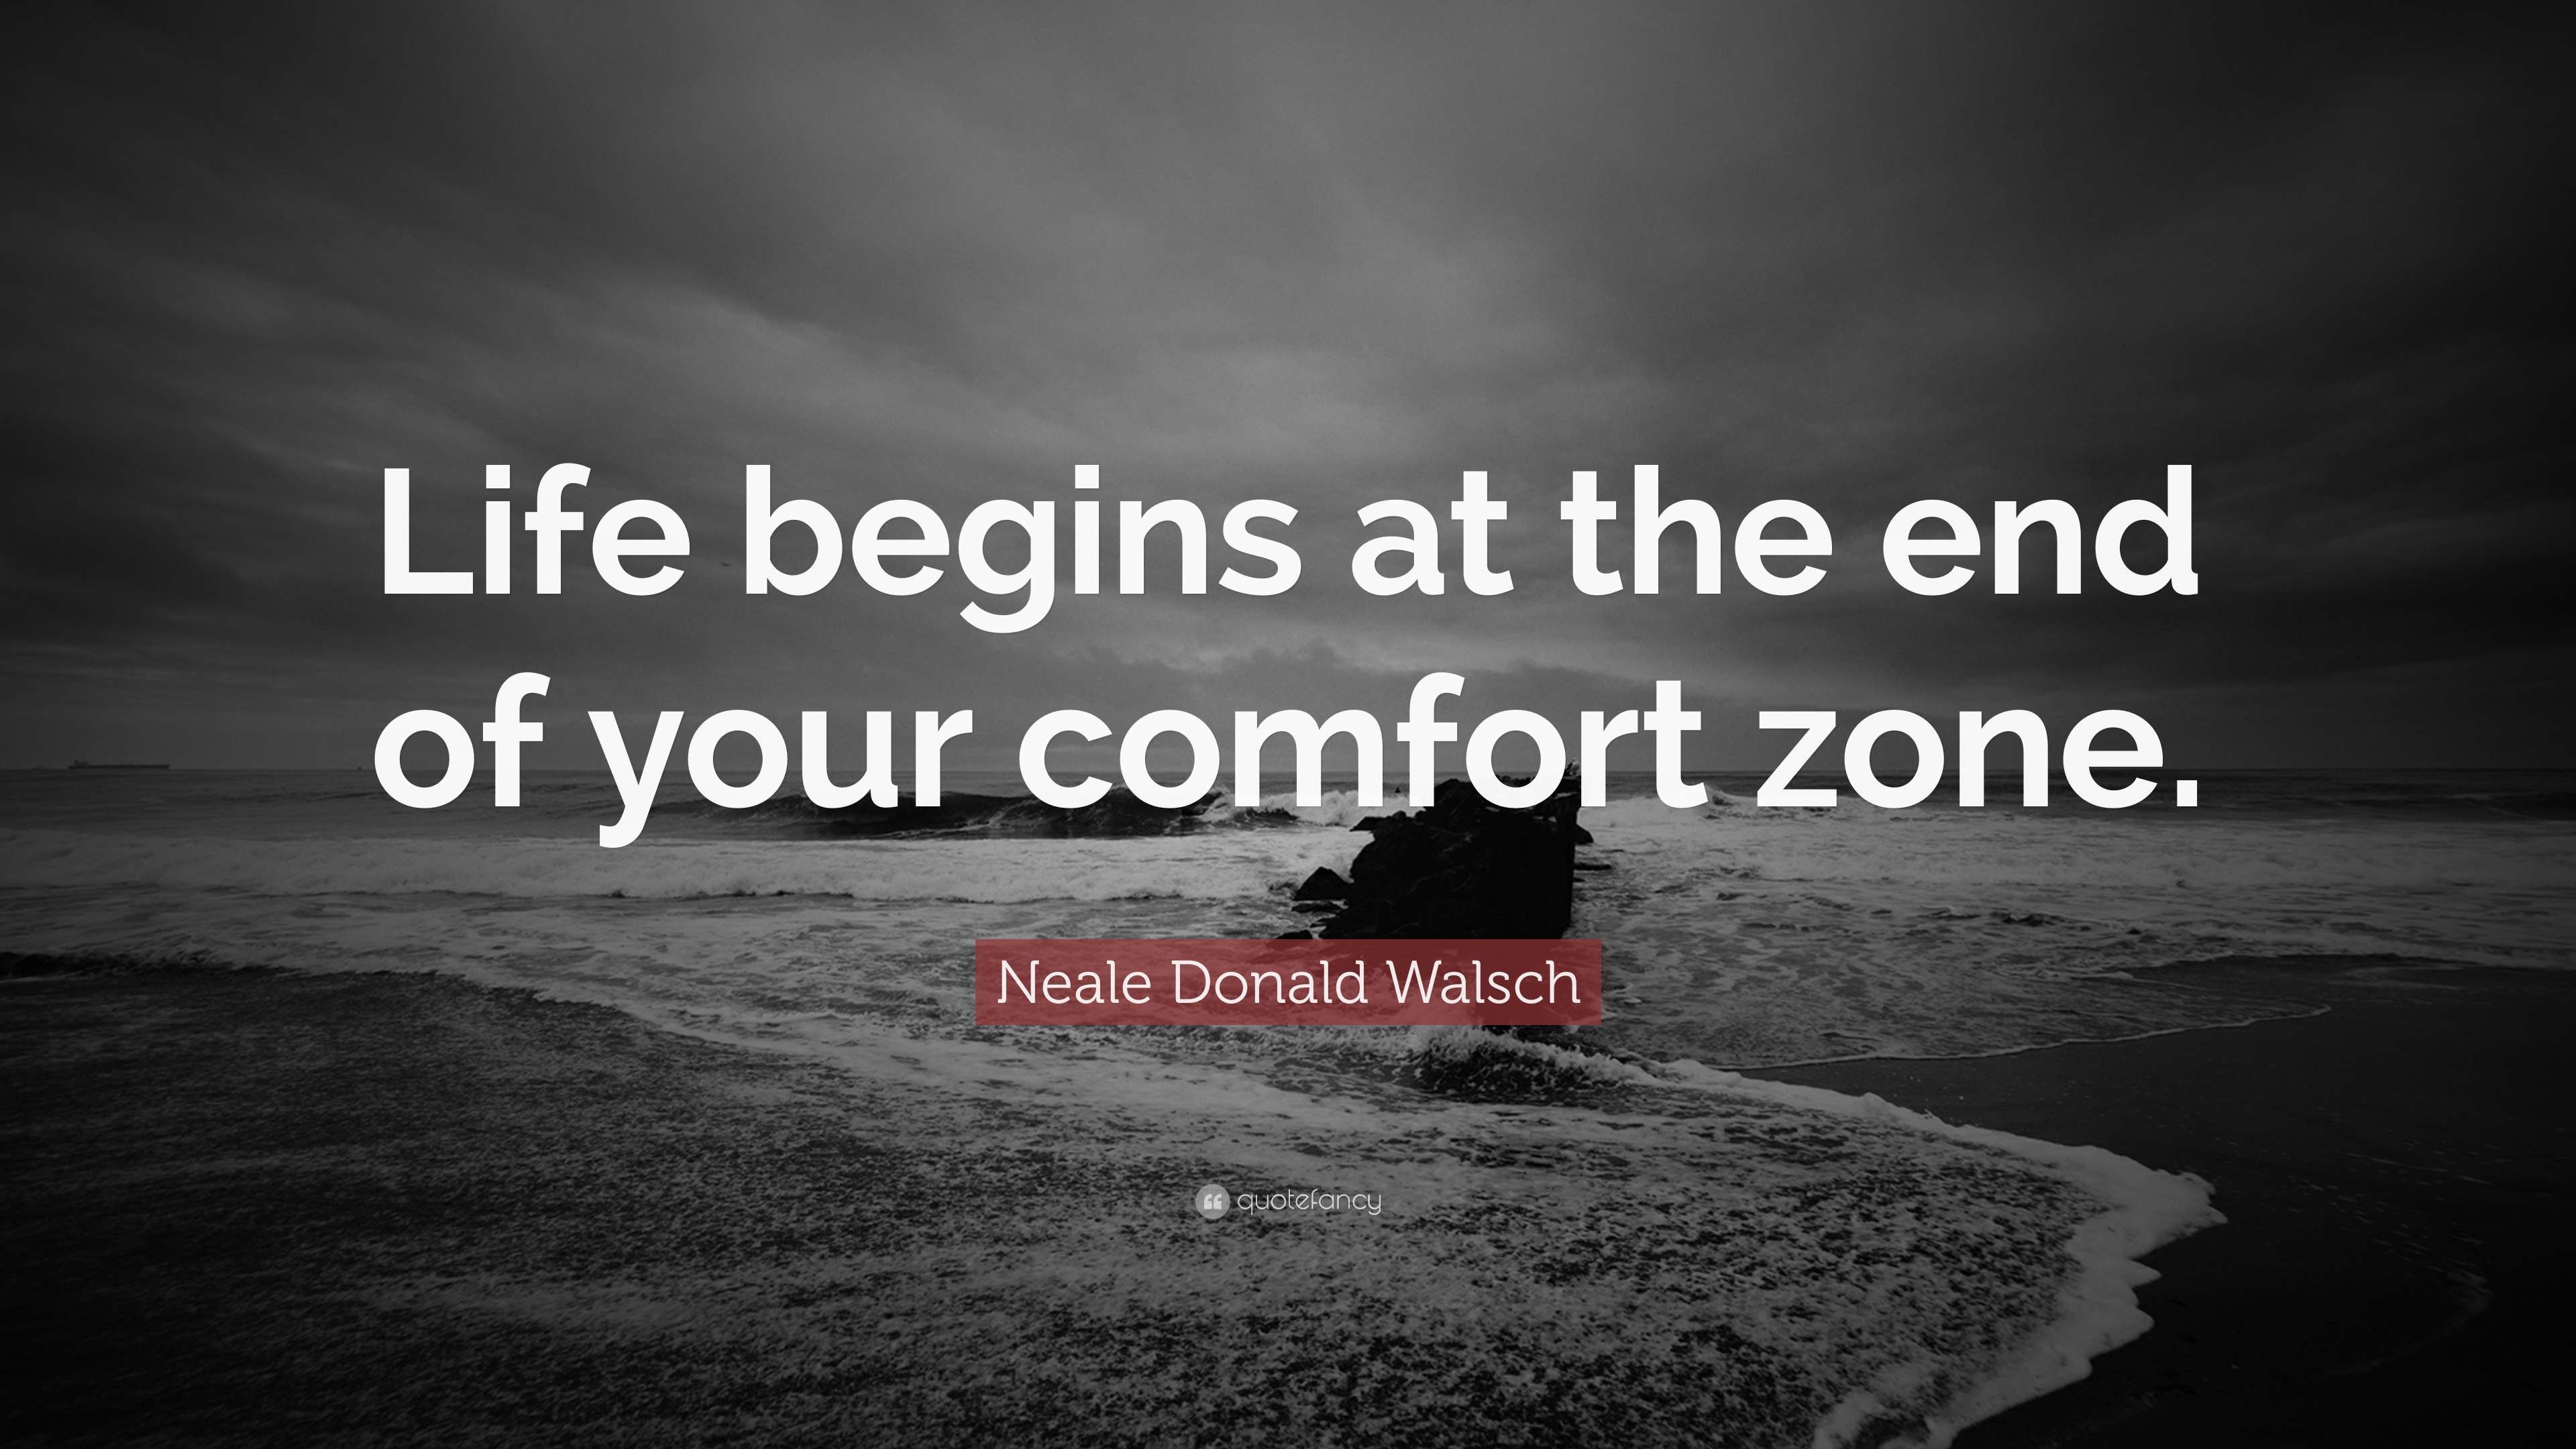 Neale Donald Walsch Quote: “Life begins at the end of your comfort